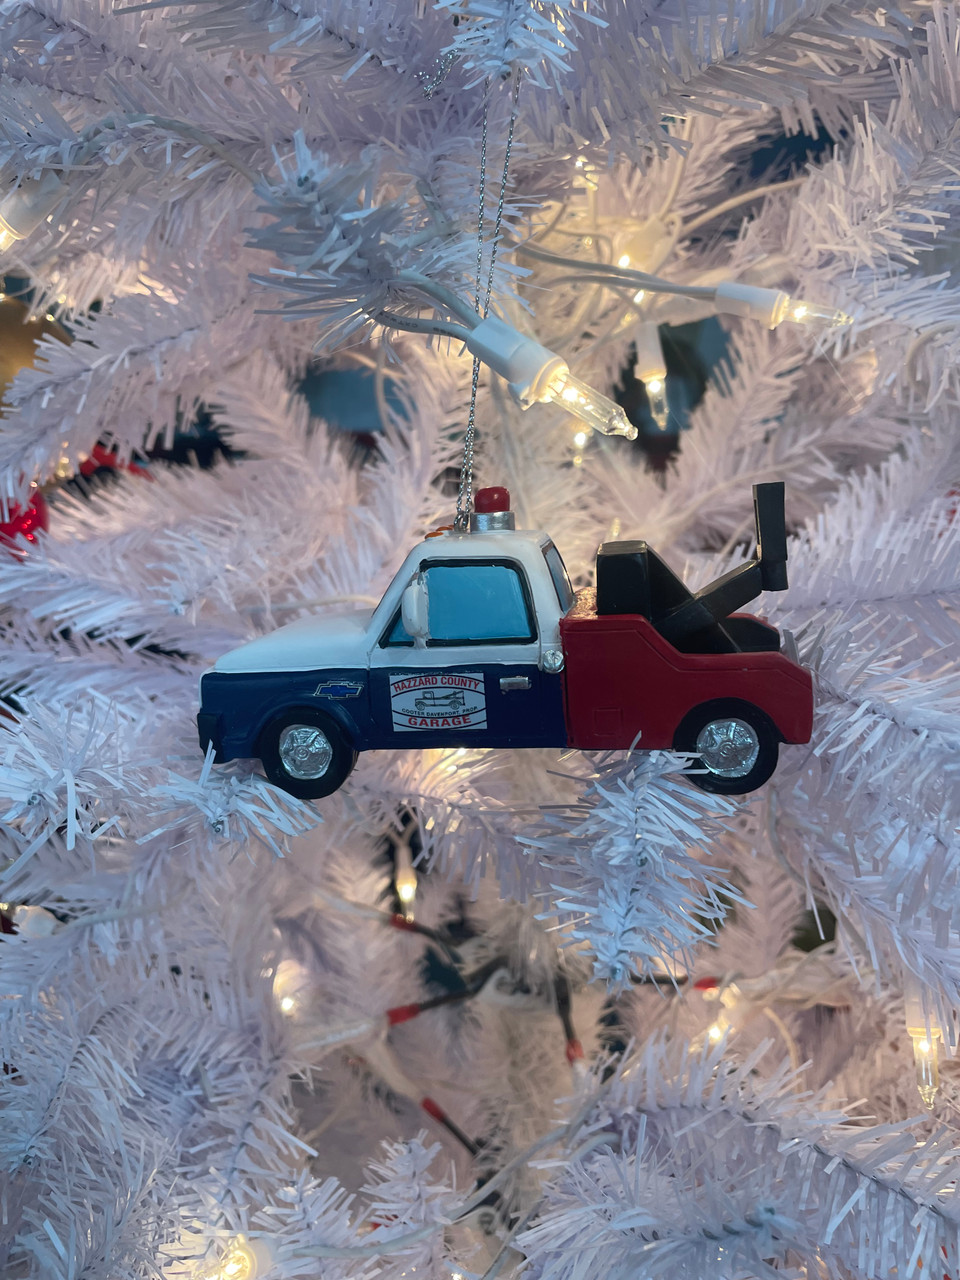 Cooter’s Tow Truck Christmas Ornament With Sound Button W/Cooter doing “Breaker One, Breaker One”